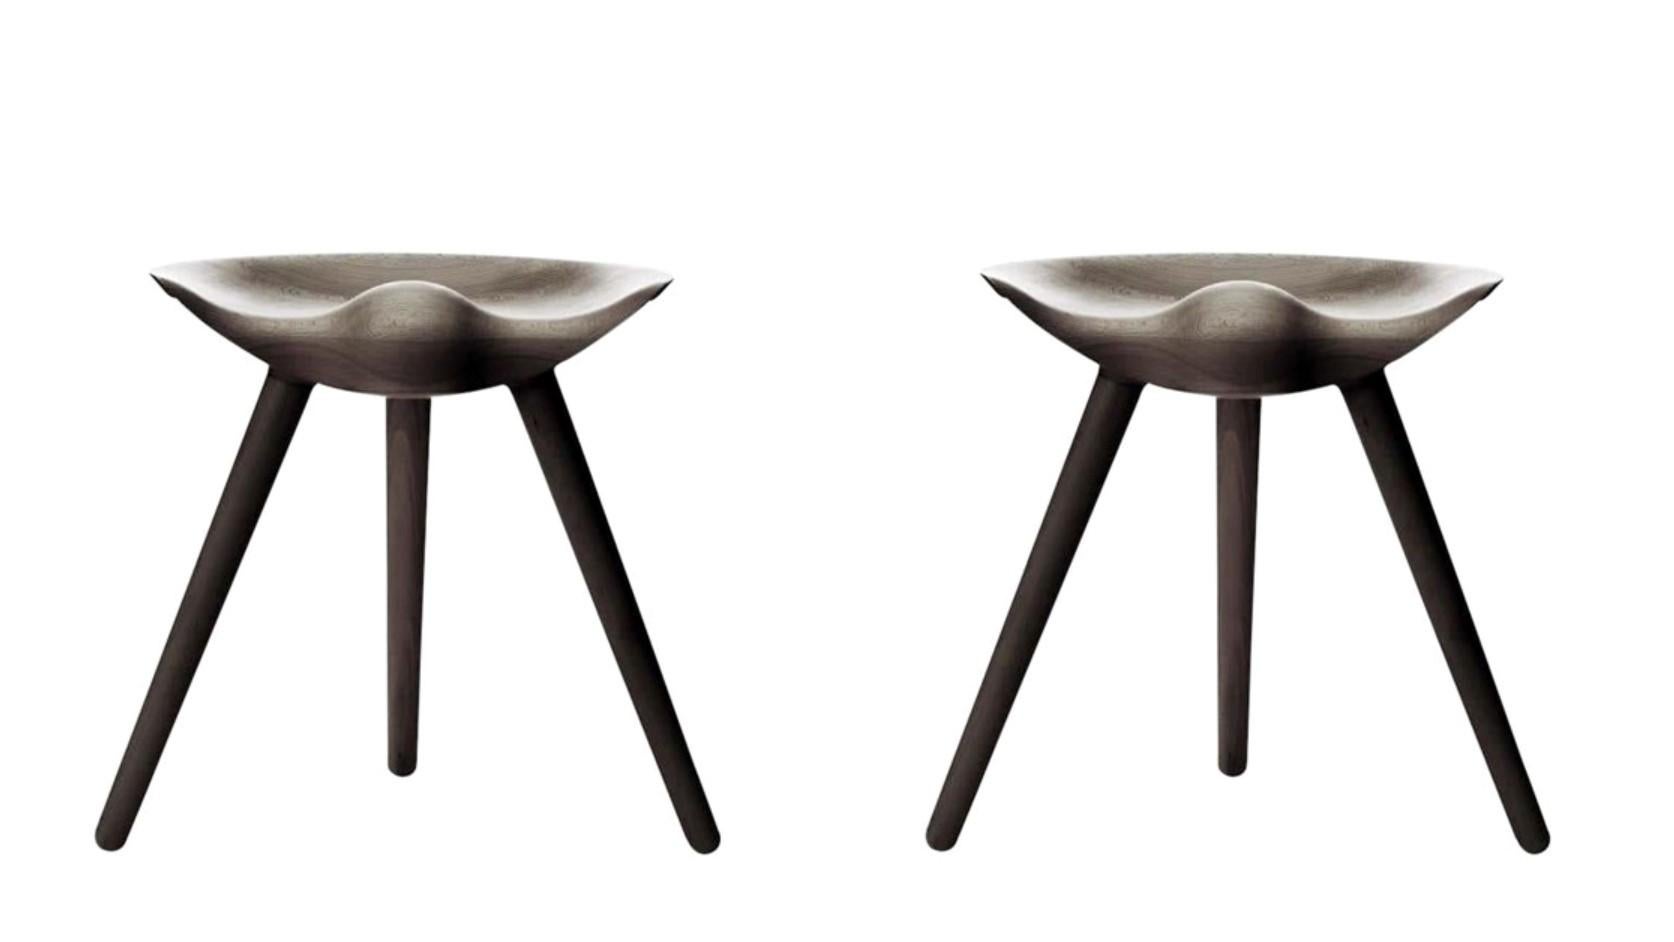 Set Of 2 Brown Oak Stools by Lassen
Dimensions: H 48 x W 36 x L 55.5 cm
Materials: Oak

In 1942 Mogens Lassen designed the Stool ML42 as a piece for a furniture exhibition held at the Danish Museum of Decorative Art. He took inspiration from the